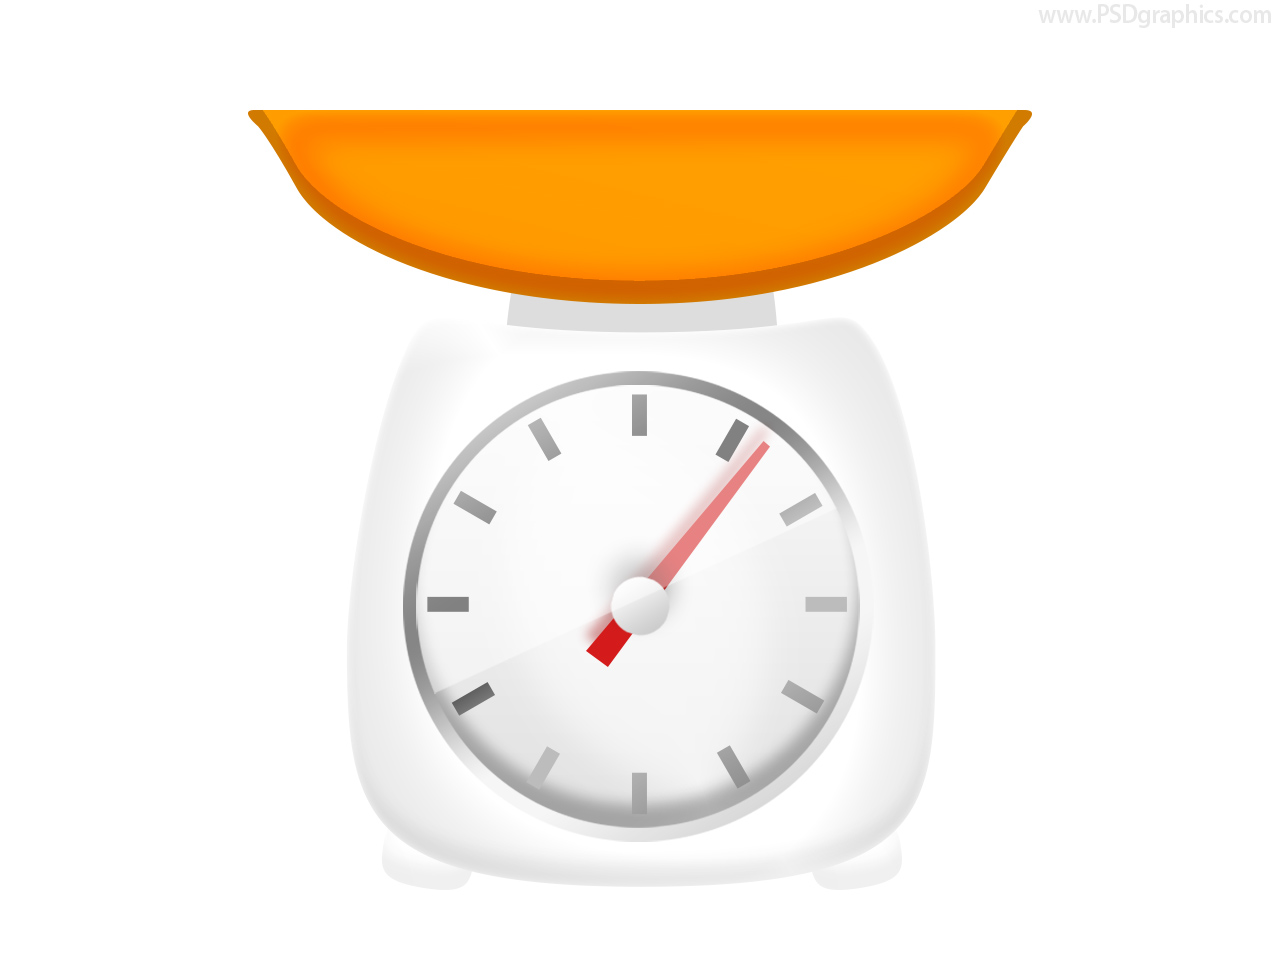 https://www.freeiconspng.com/uploads/kitchen-scale-icon-psd--psdgraphics-22.jpg